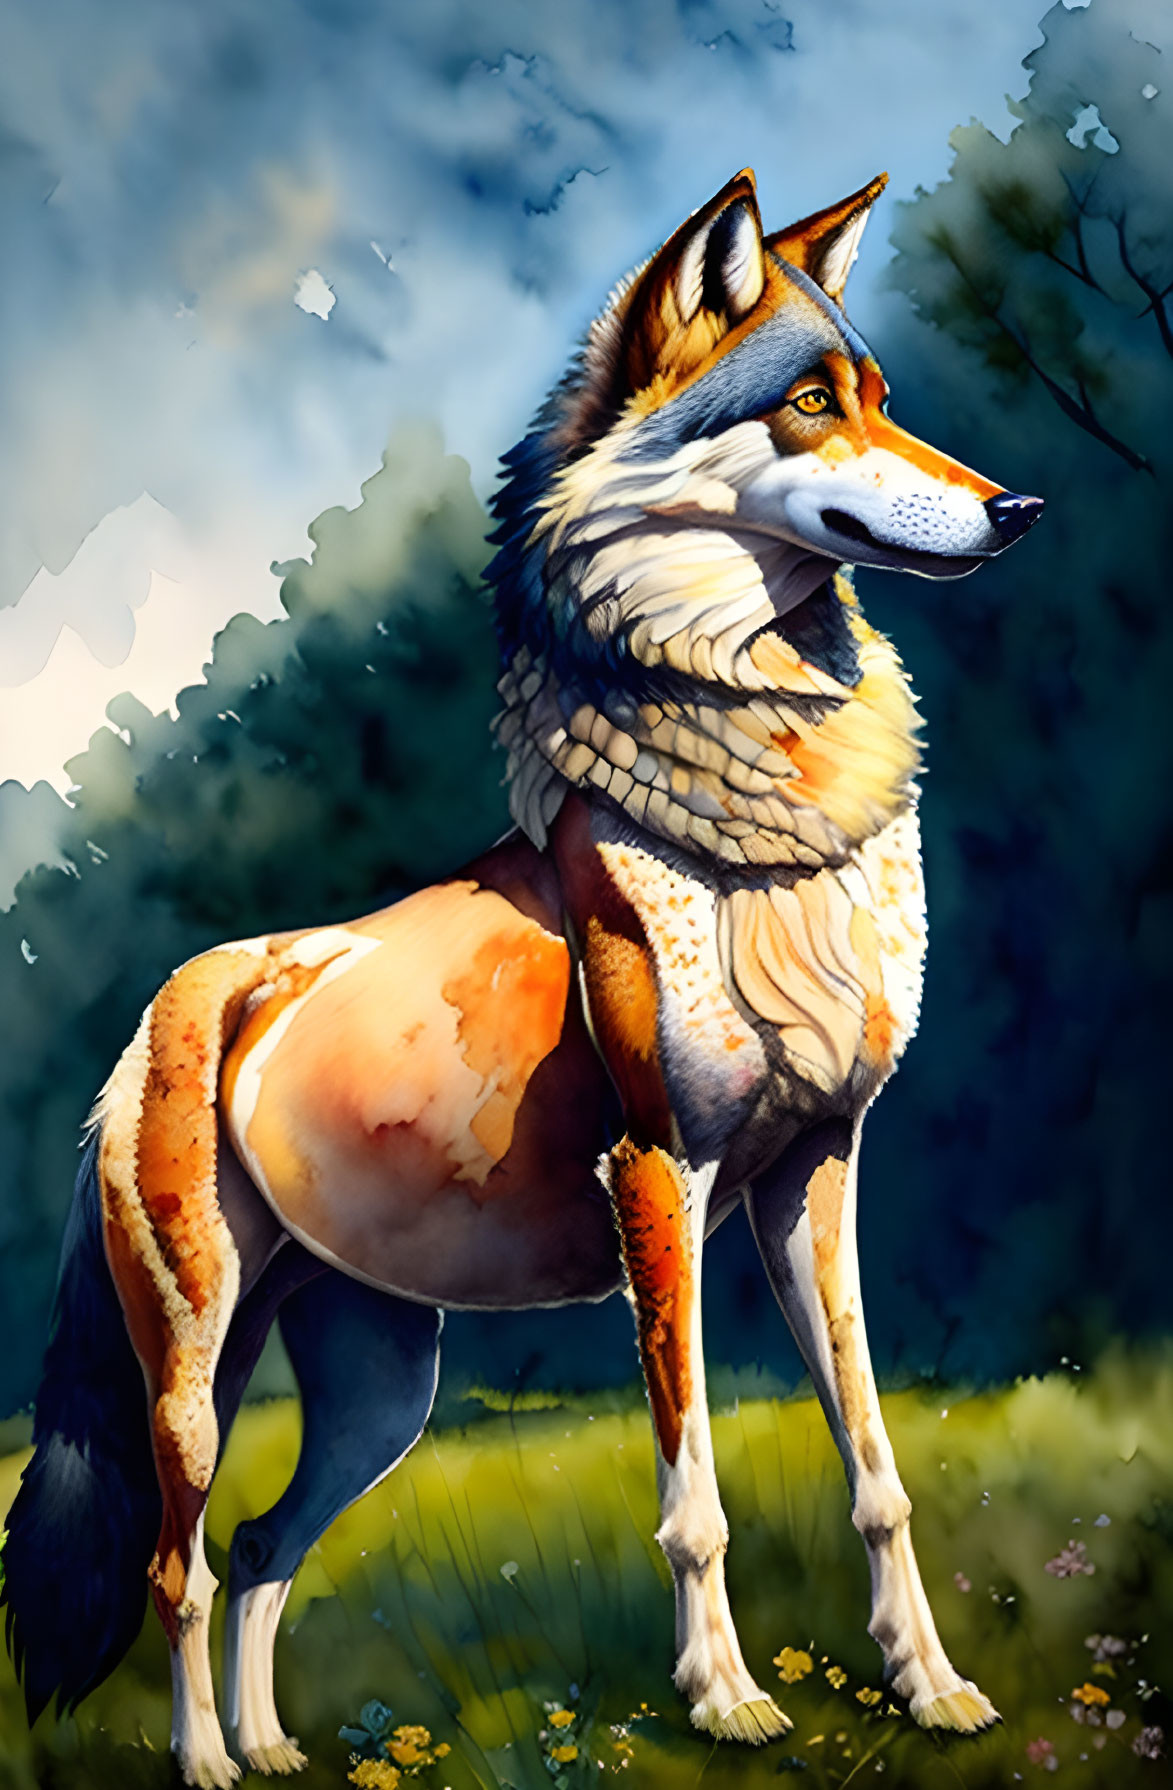 Detailed anthropomorphic fox in natural setting with orange, white, and black fur.